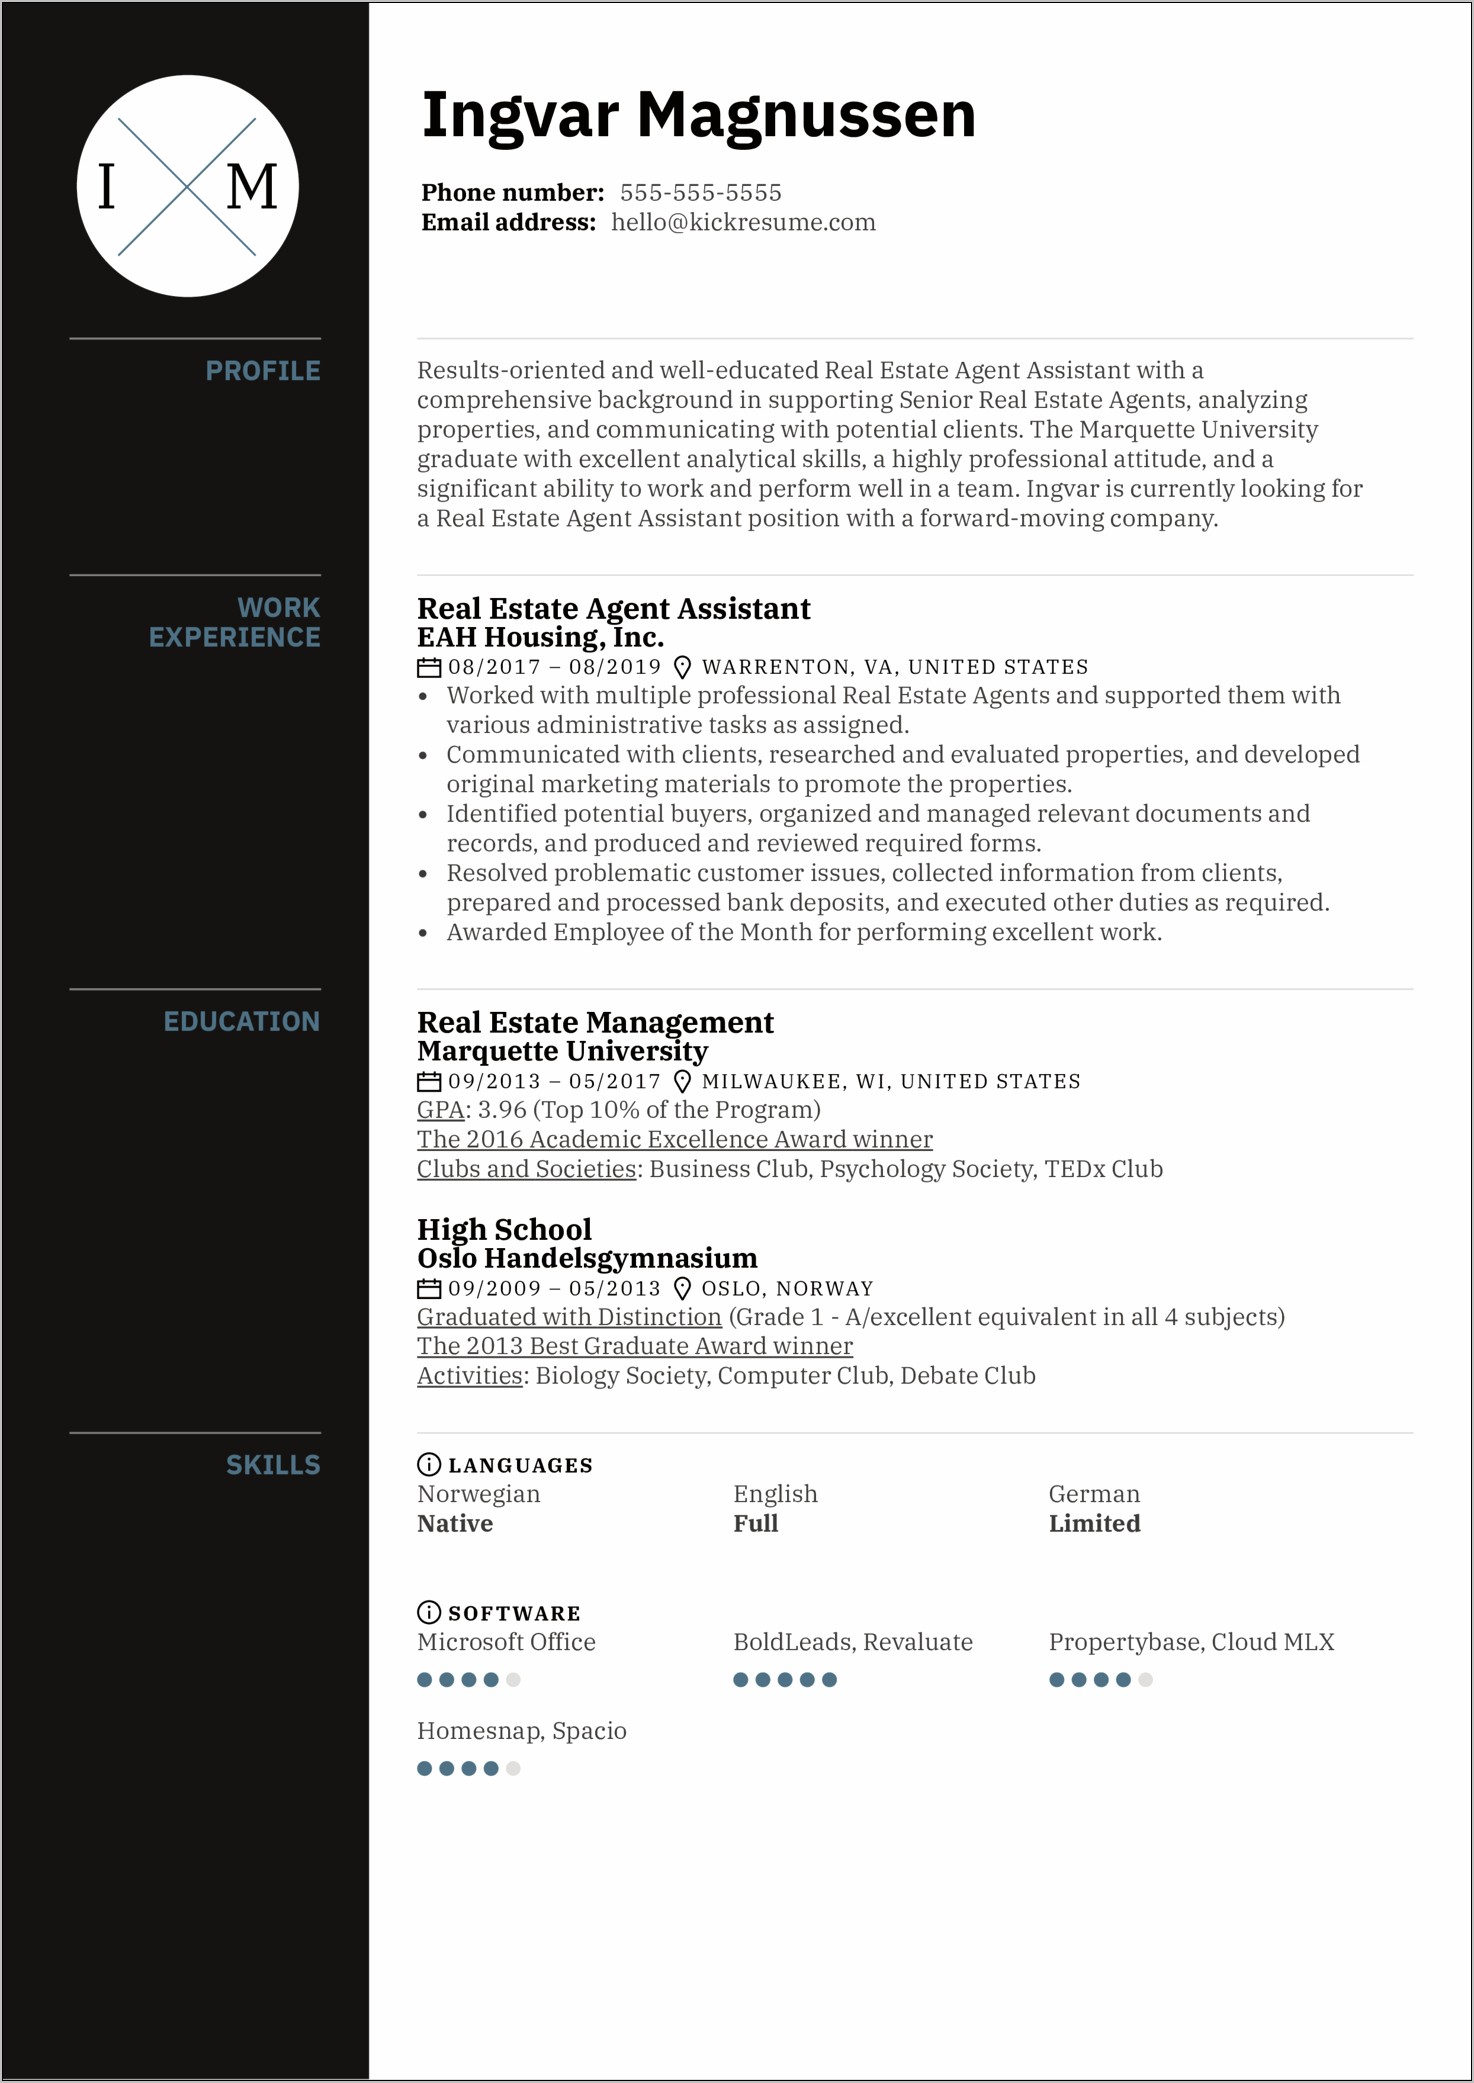 Objective For Real Estate Assistant Position Resume